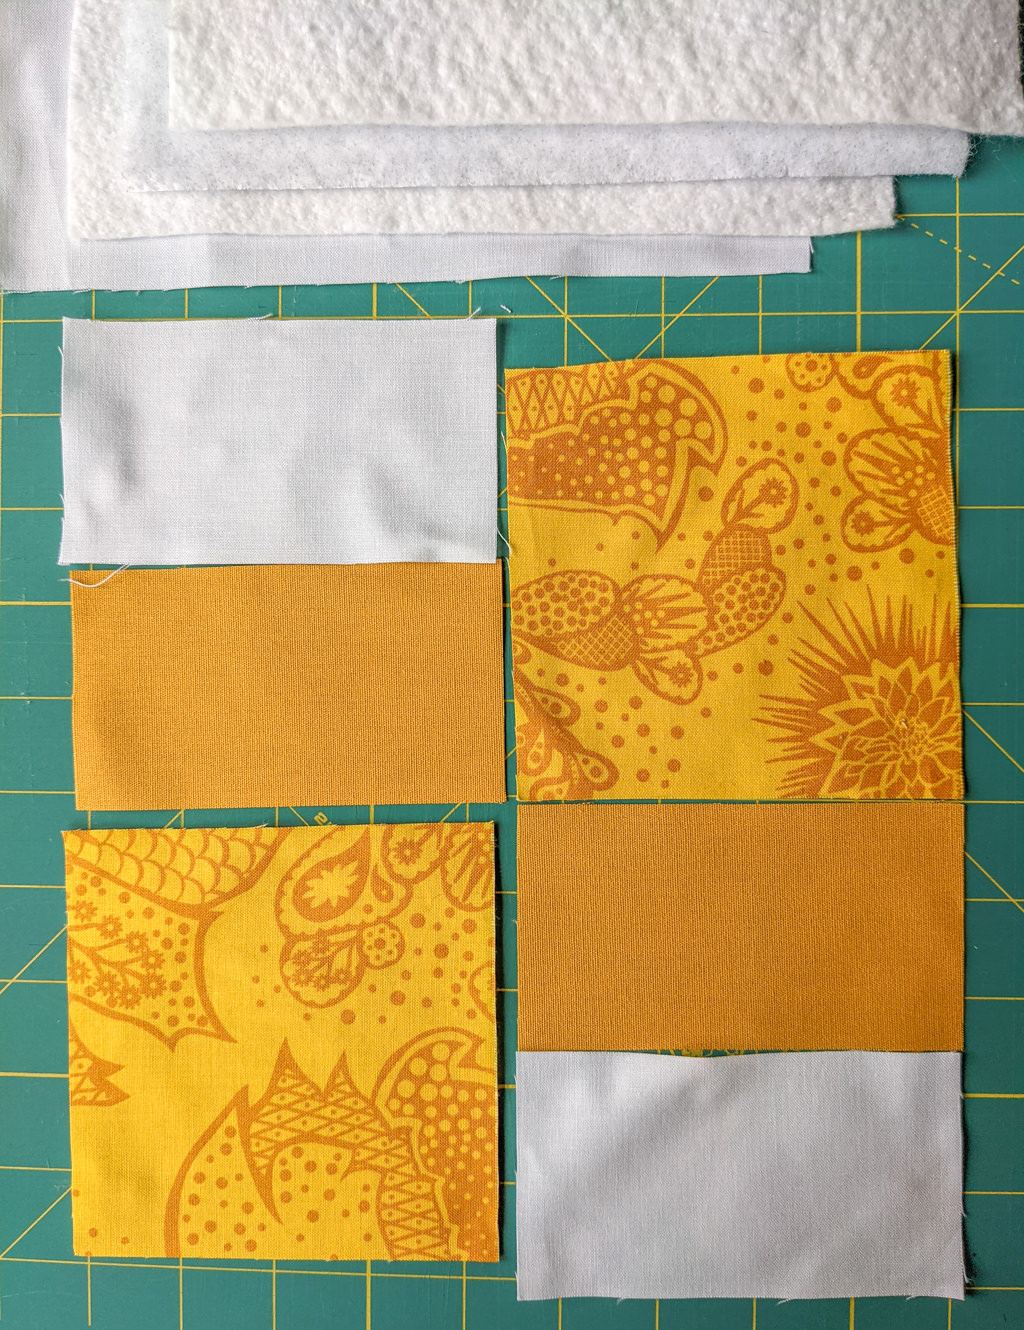 Pattern pieces for sewing a quilted potholder